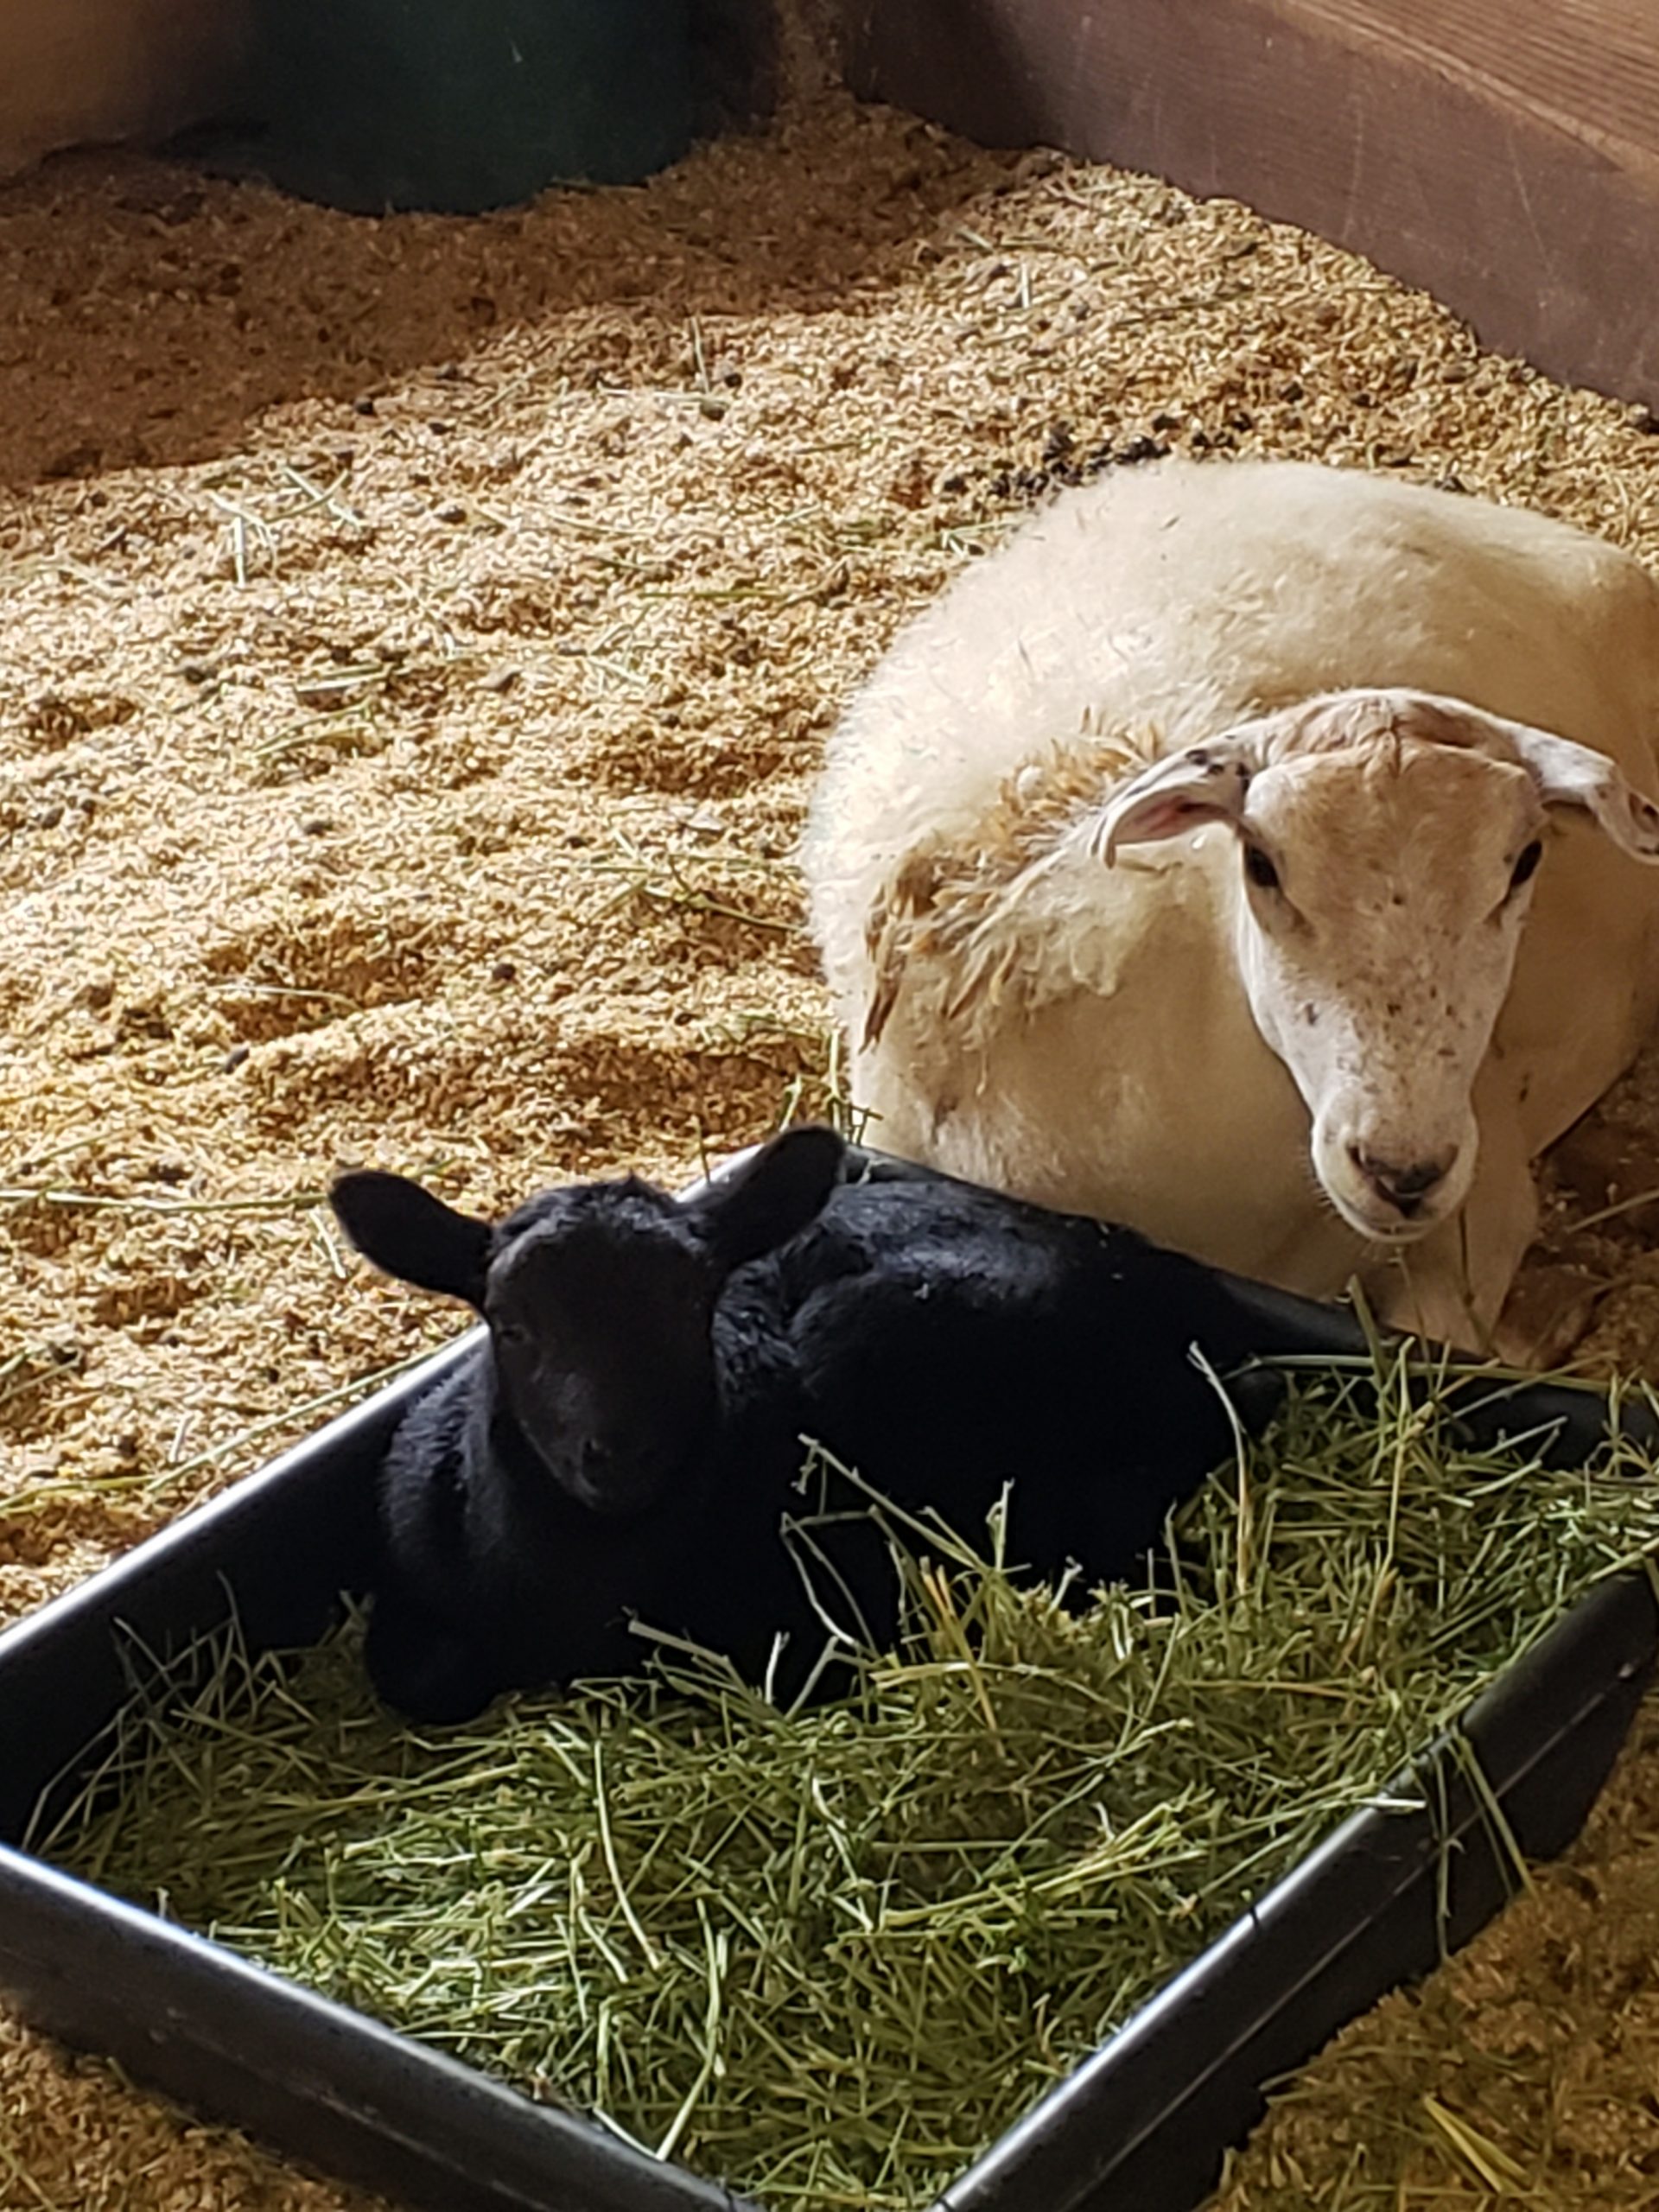 Mama Sheep with Kid in Stall